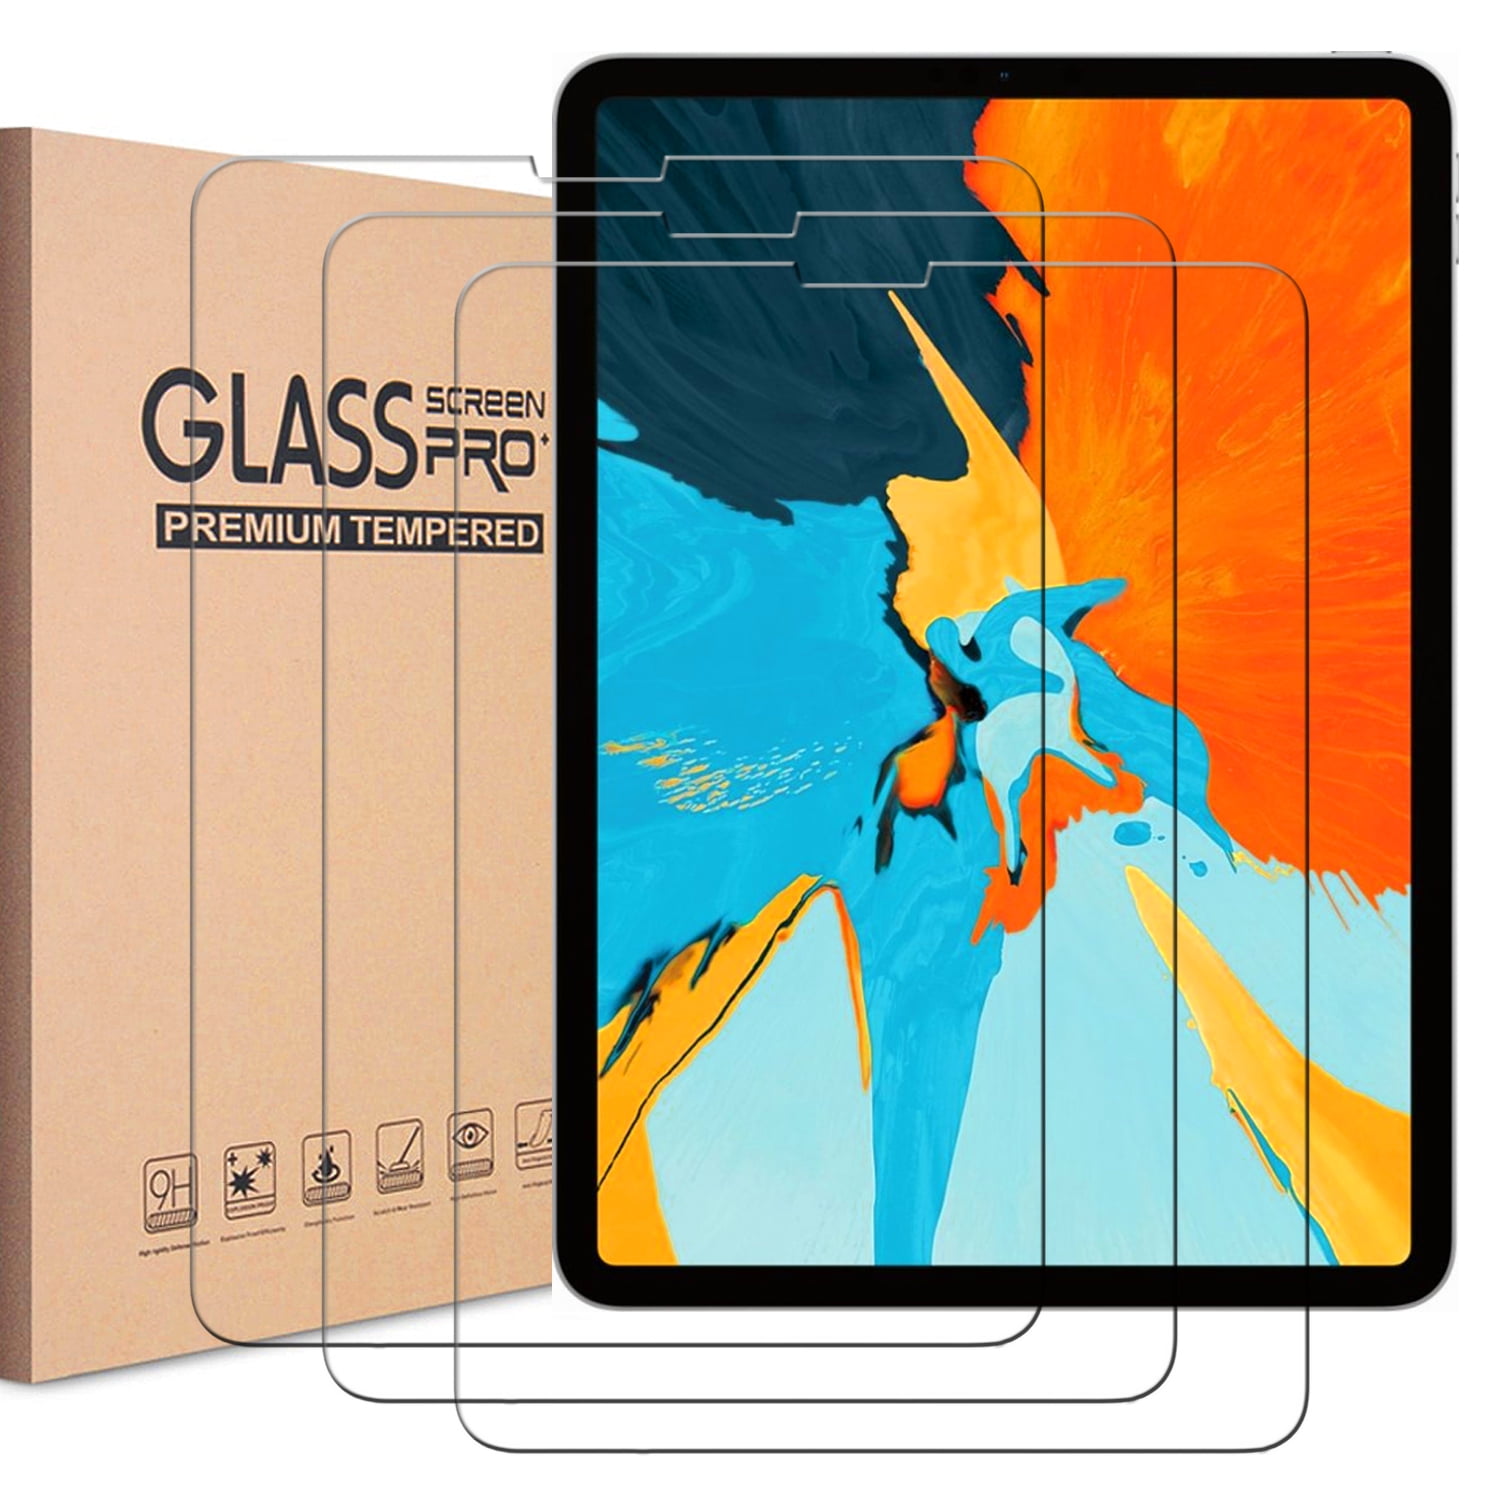 2018/2017 /Pro 9.7 9H Tempered Glass Film Replacement for iPad 9.7 Hianjoo 2-Pcs Screen Protector Compatible with iPad 9.7 Inch /Air 1/Air 2 2016